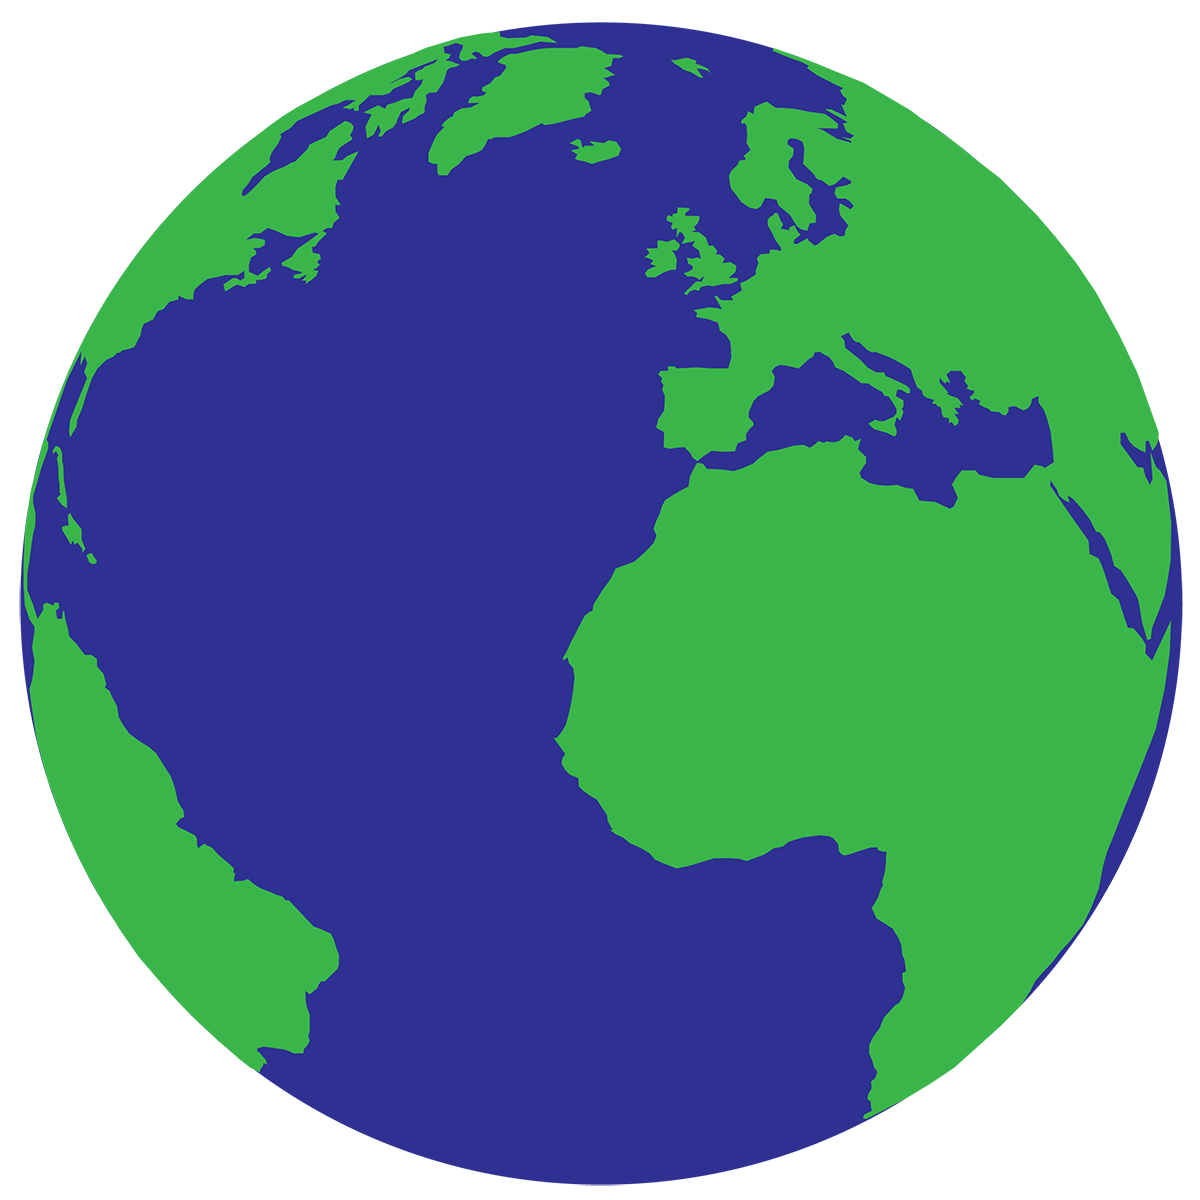 Earth planet drawing at. Planeten clipart adobe illustrator